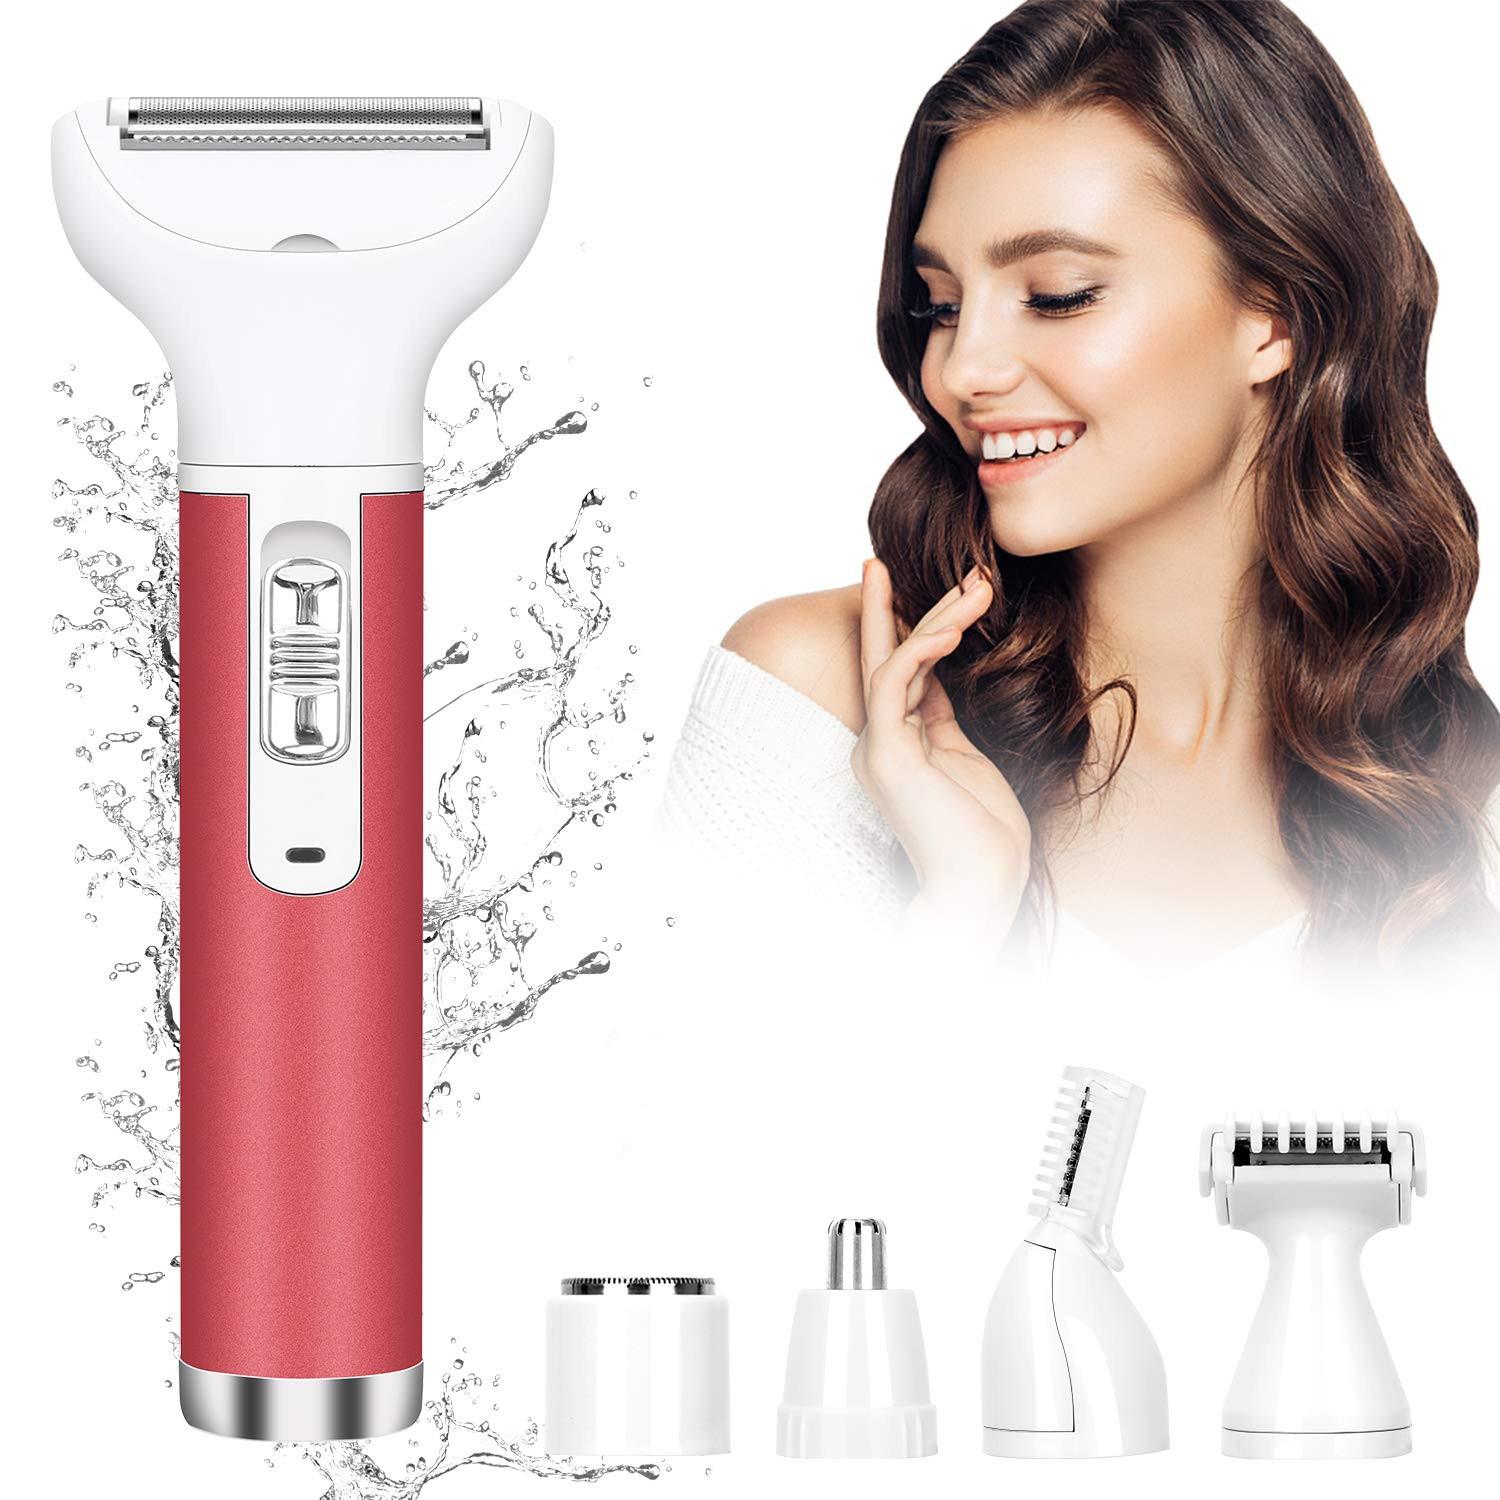 Bikini Trimmer for Women, 2-in-1 Electric Razors for Women, Lady Pubic Hair  Trimmer for Bikini Line/Legs/Arms/Armpits, Cordless Body Trimmer Safe Hair  Removal Groomer Kit, Mother's Day Gift : : Beauty & Personal